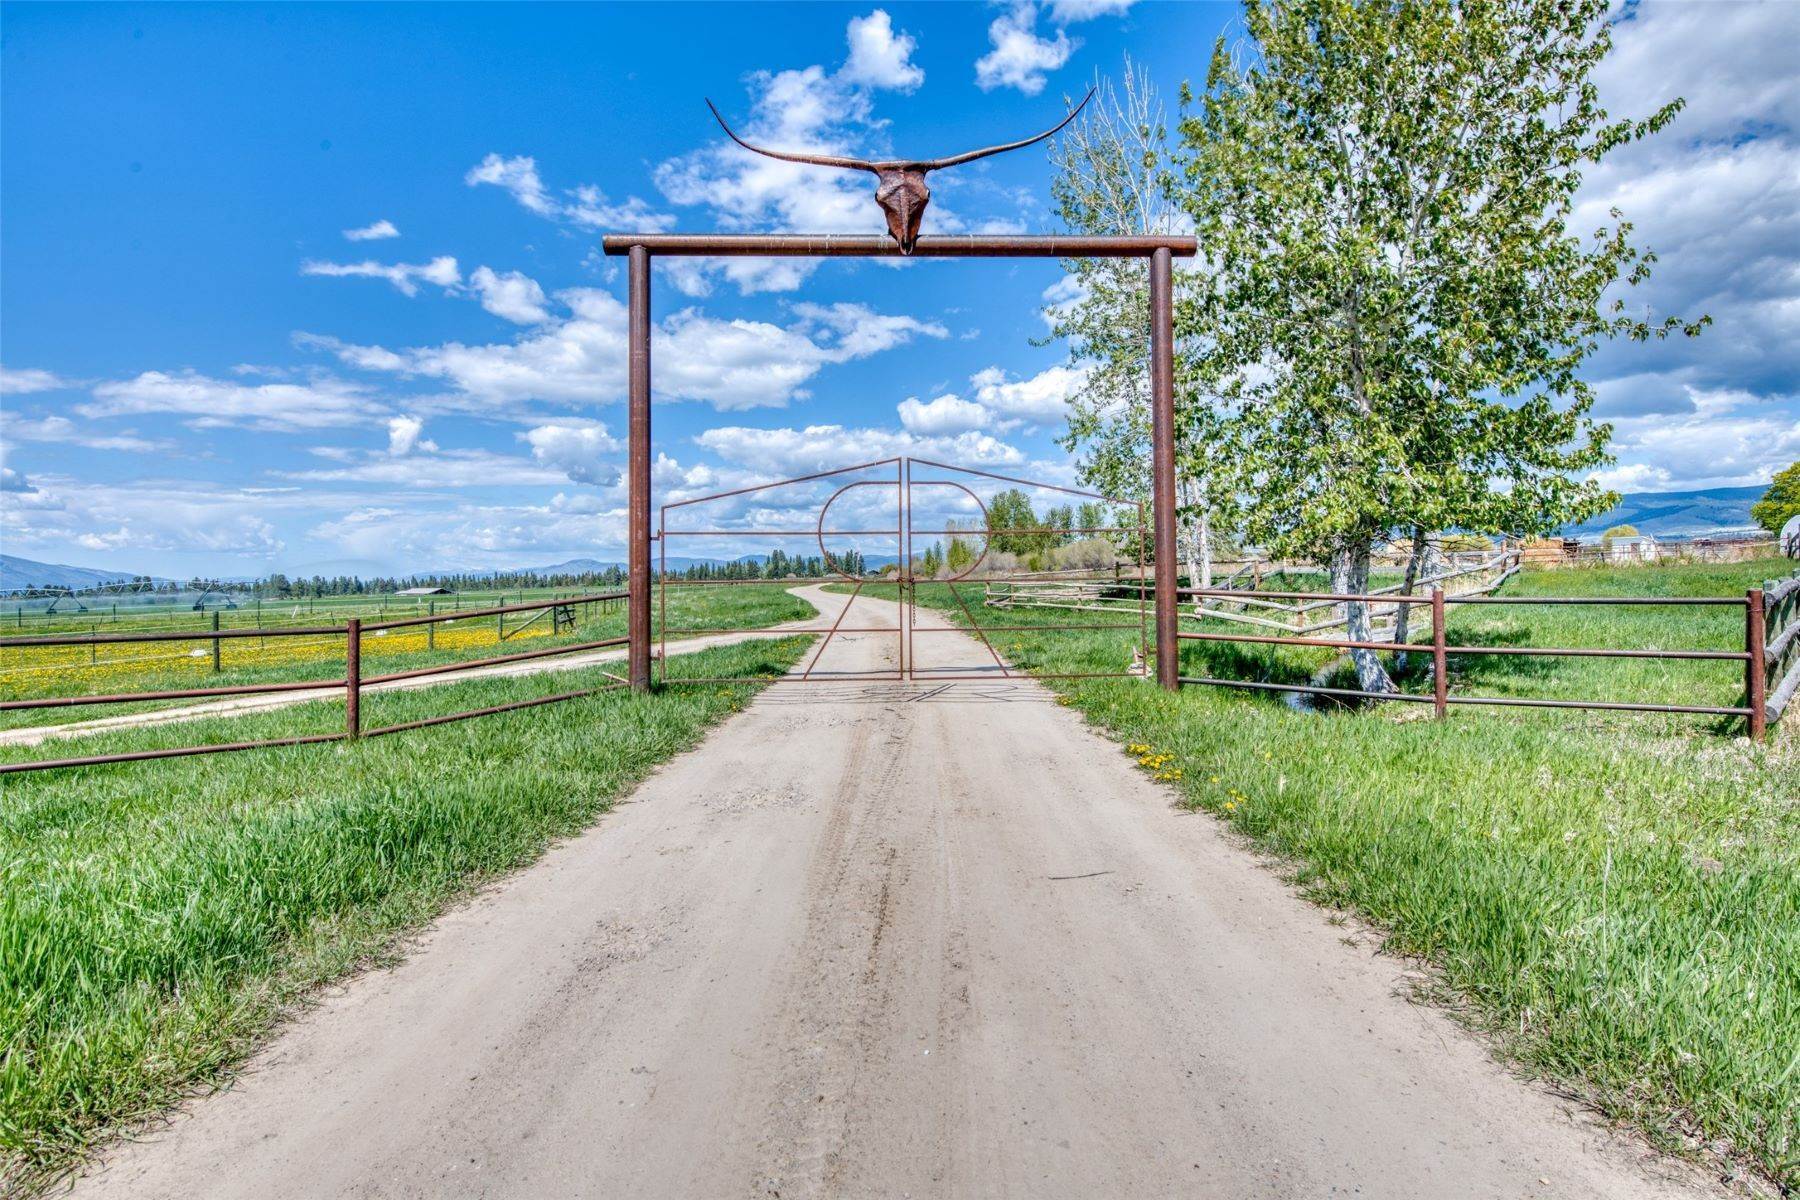 Farm and Ranch Properties for Sale at NKN S Sunset Bench Road, Stevensville, Montana 59870 United States